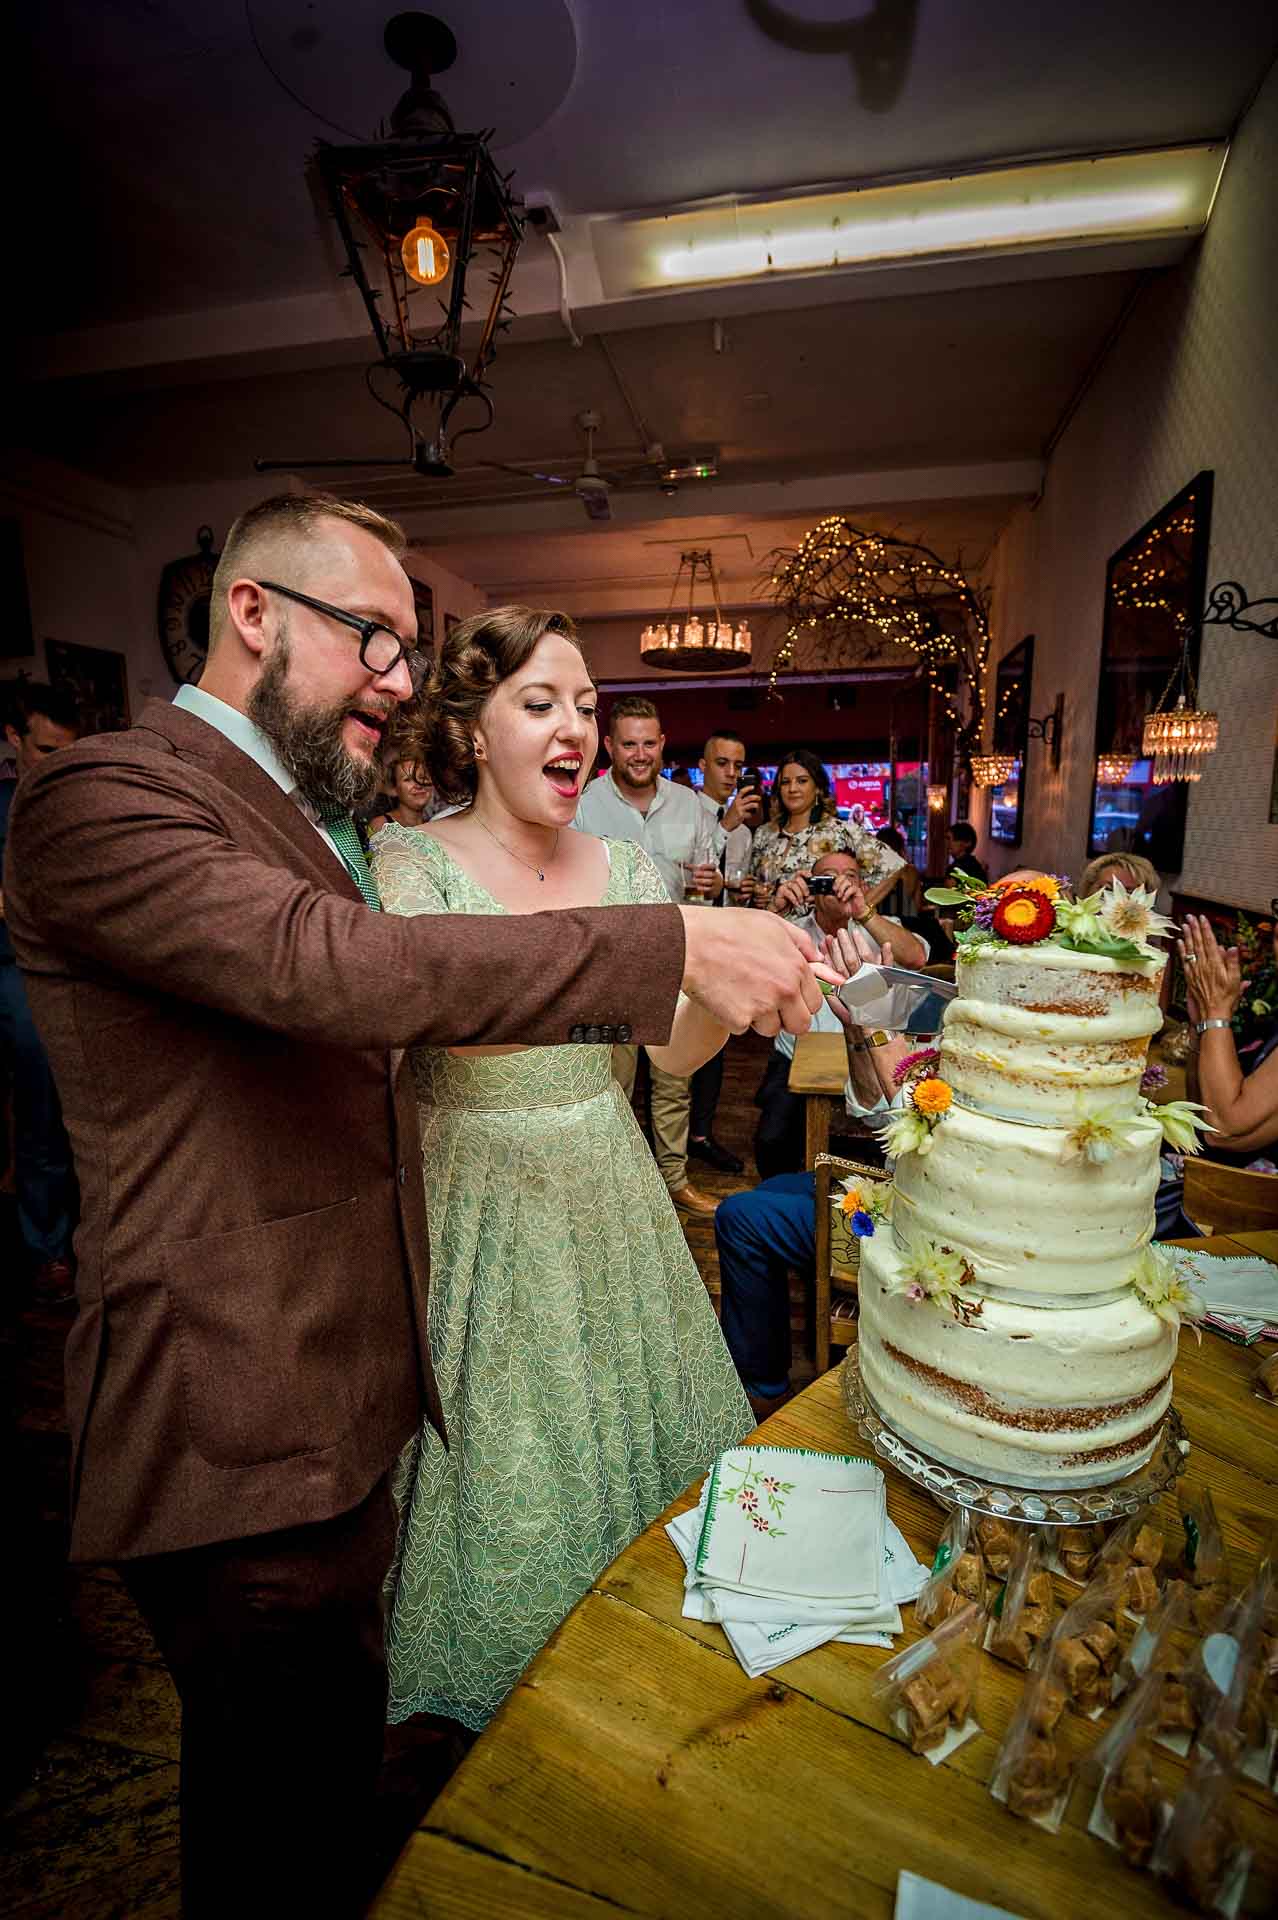 Bride and Groom carefully cutting the wedding cake in London cafe